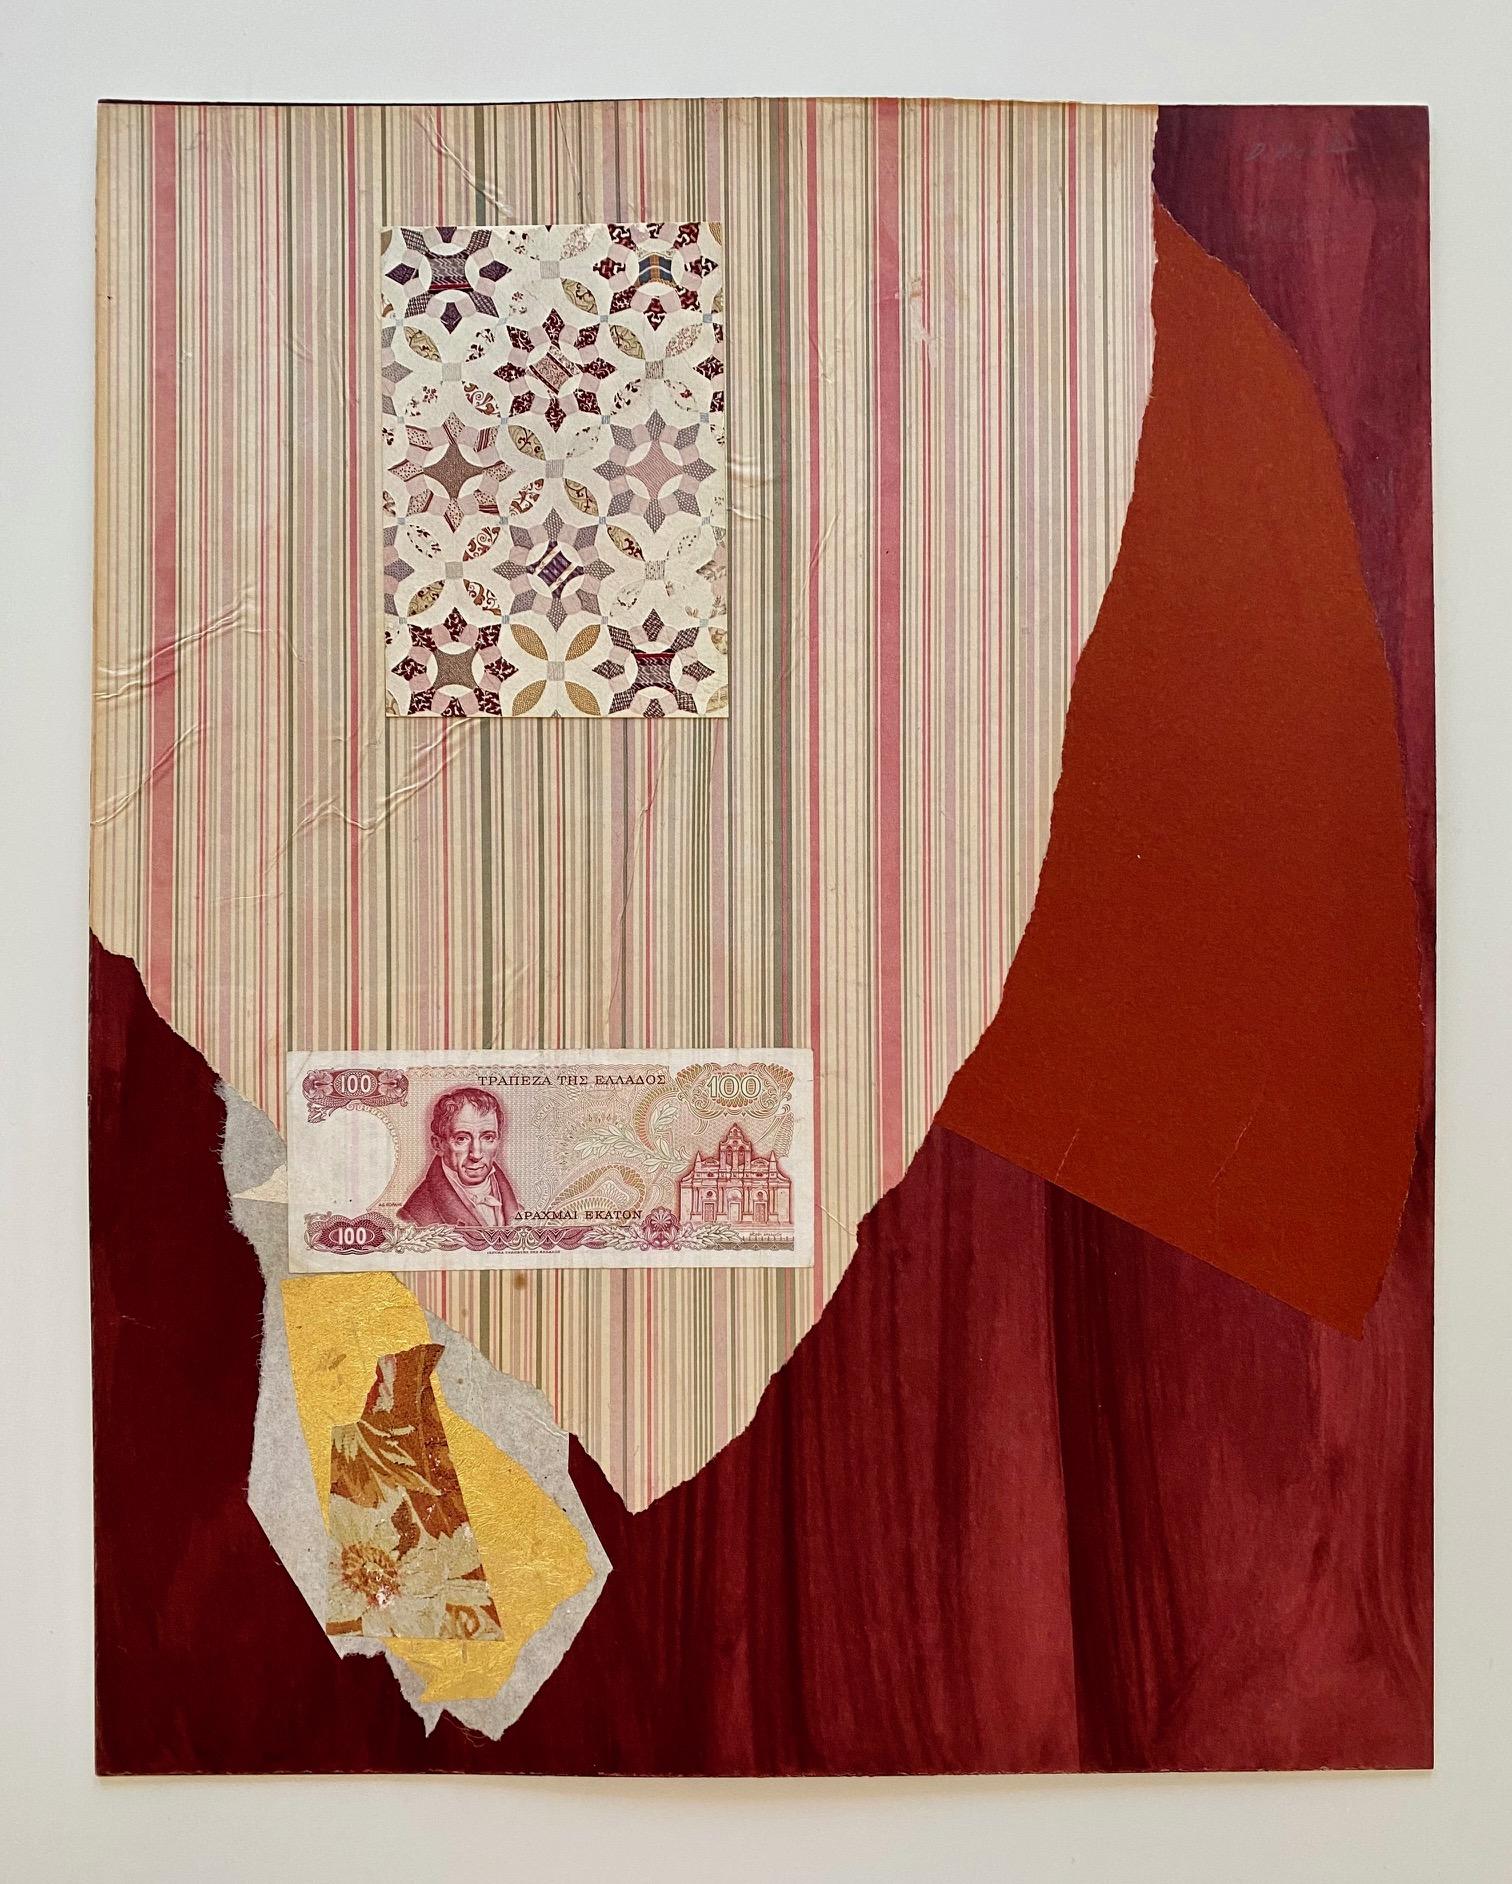 An understated departure from Dorothy Hood’s typical large and non-objective abstract paintings, this mixed-media collage demonstrates a compulsion to explore where abstract aspects intersect with tangible objects.

As one of the early Texas